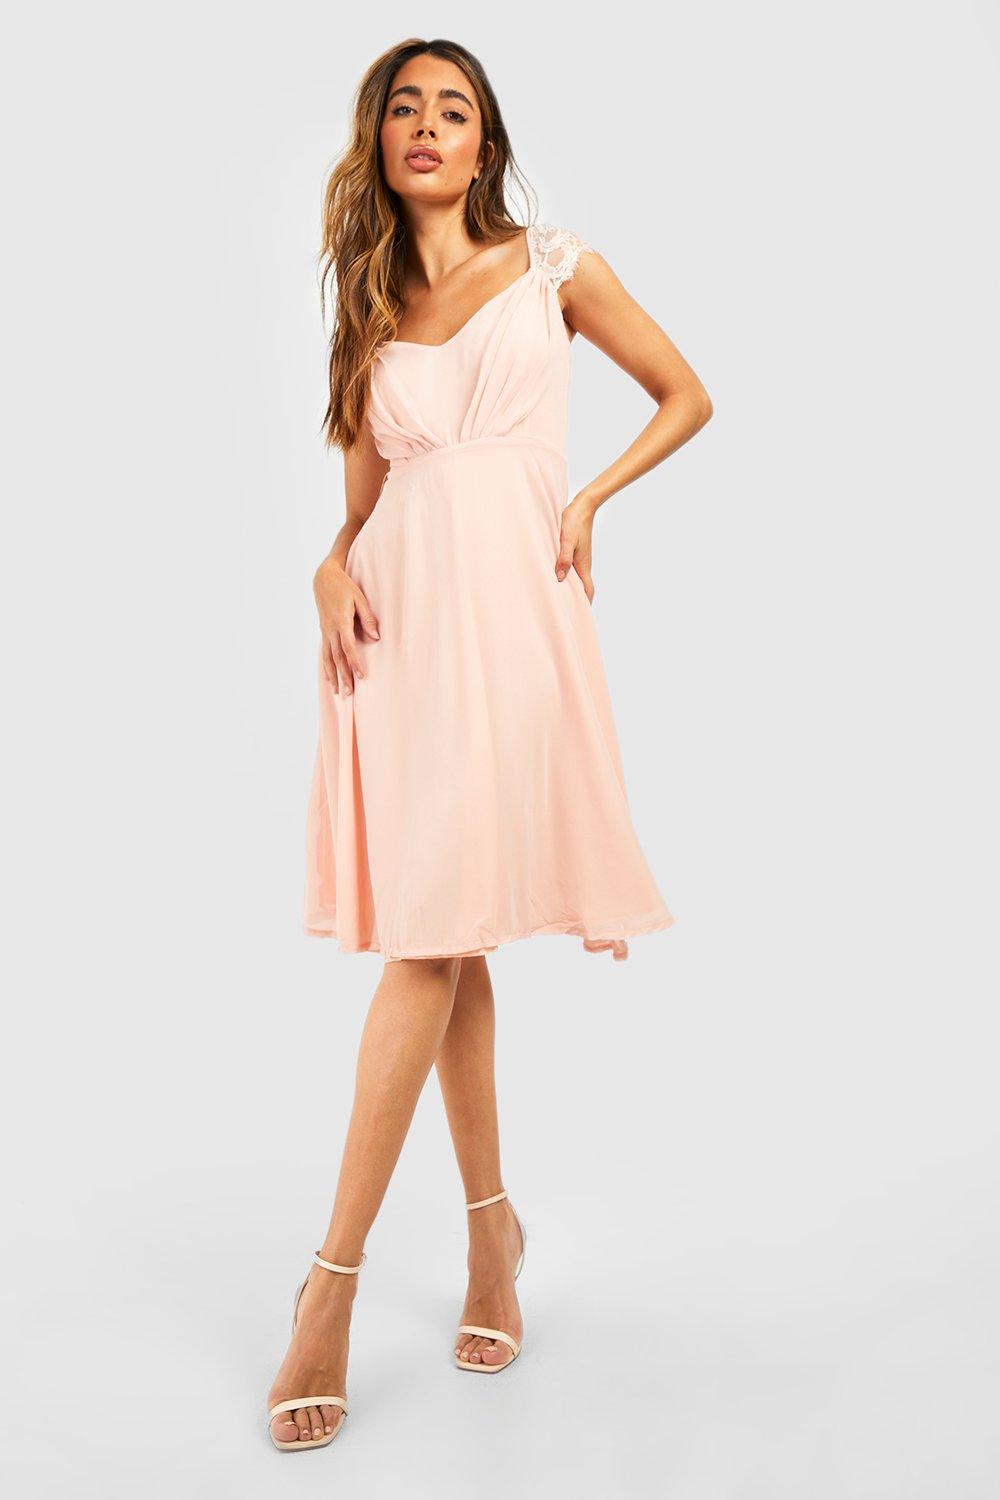 h and m fit and flare dress